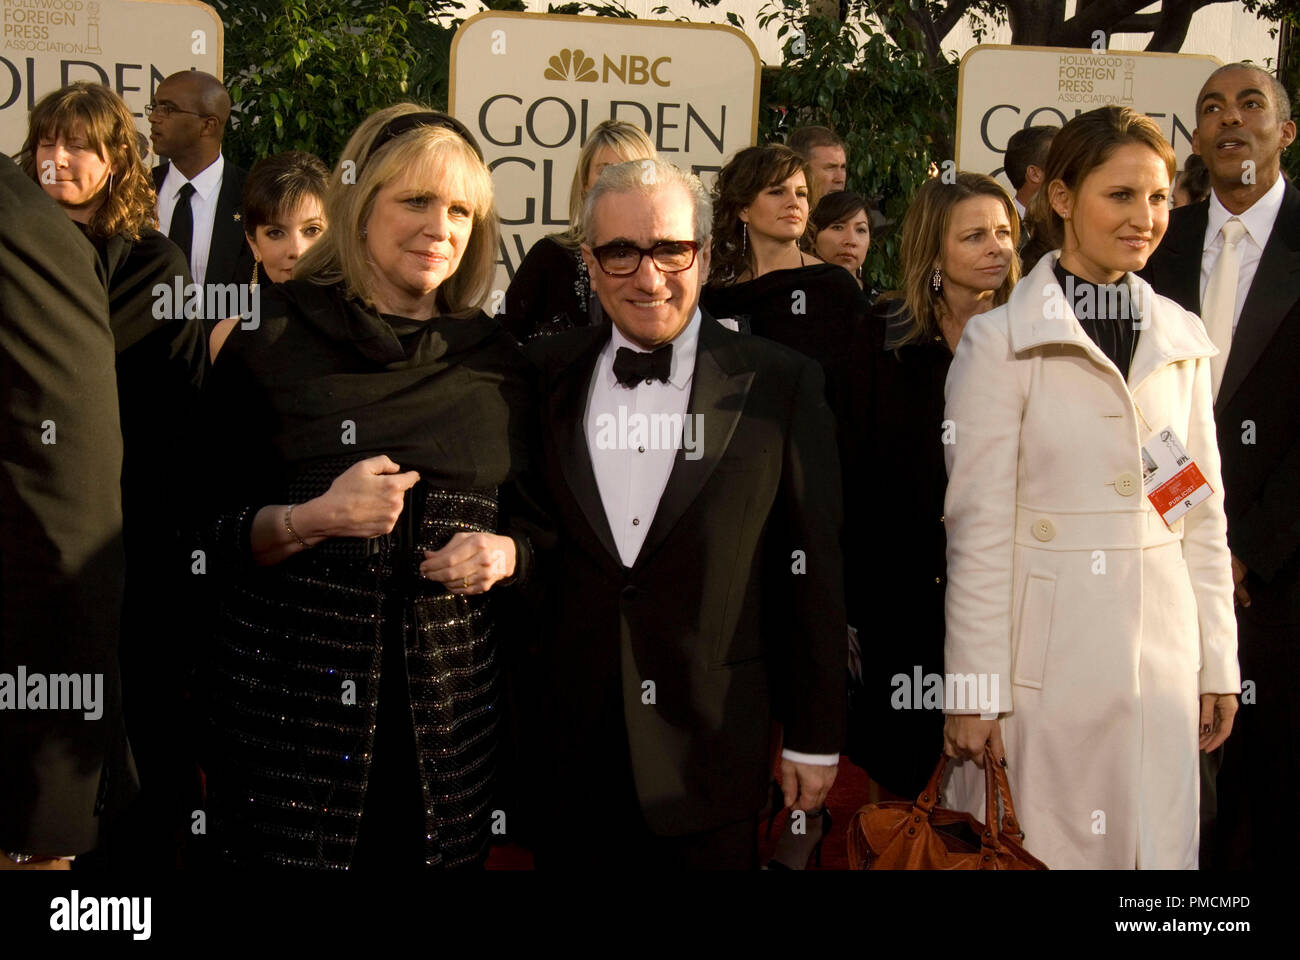 Hollywood Foreign Press Association presents the 2007 'Golden Globe Awards - 64th Annual' (Arrivals) Helen Morris, Martin Scorsese 1-15-07 Stock Photo